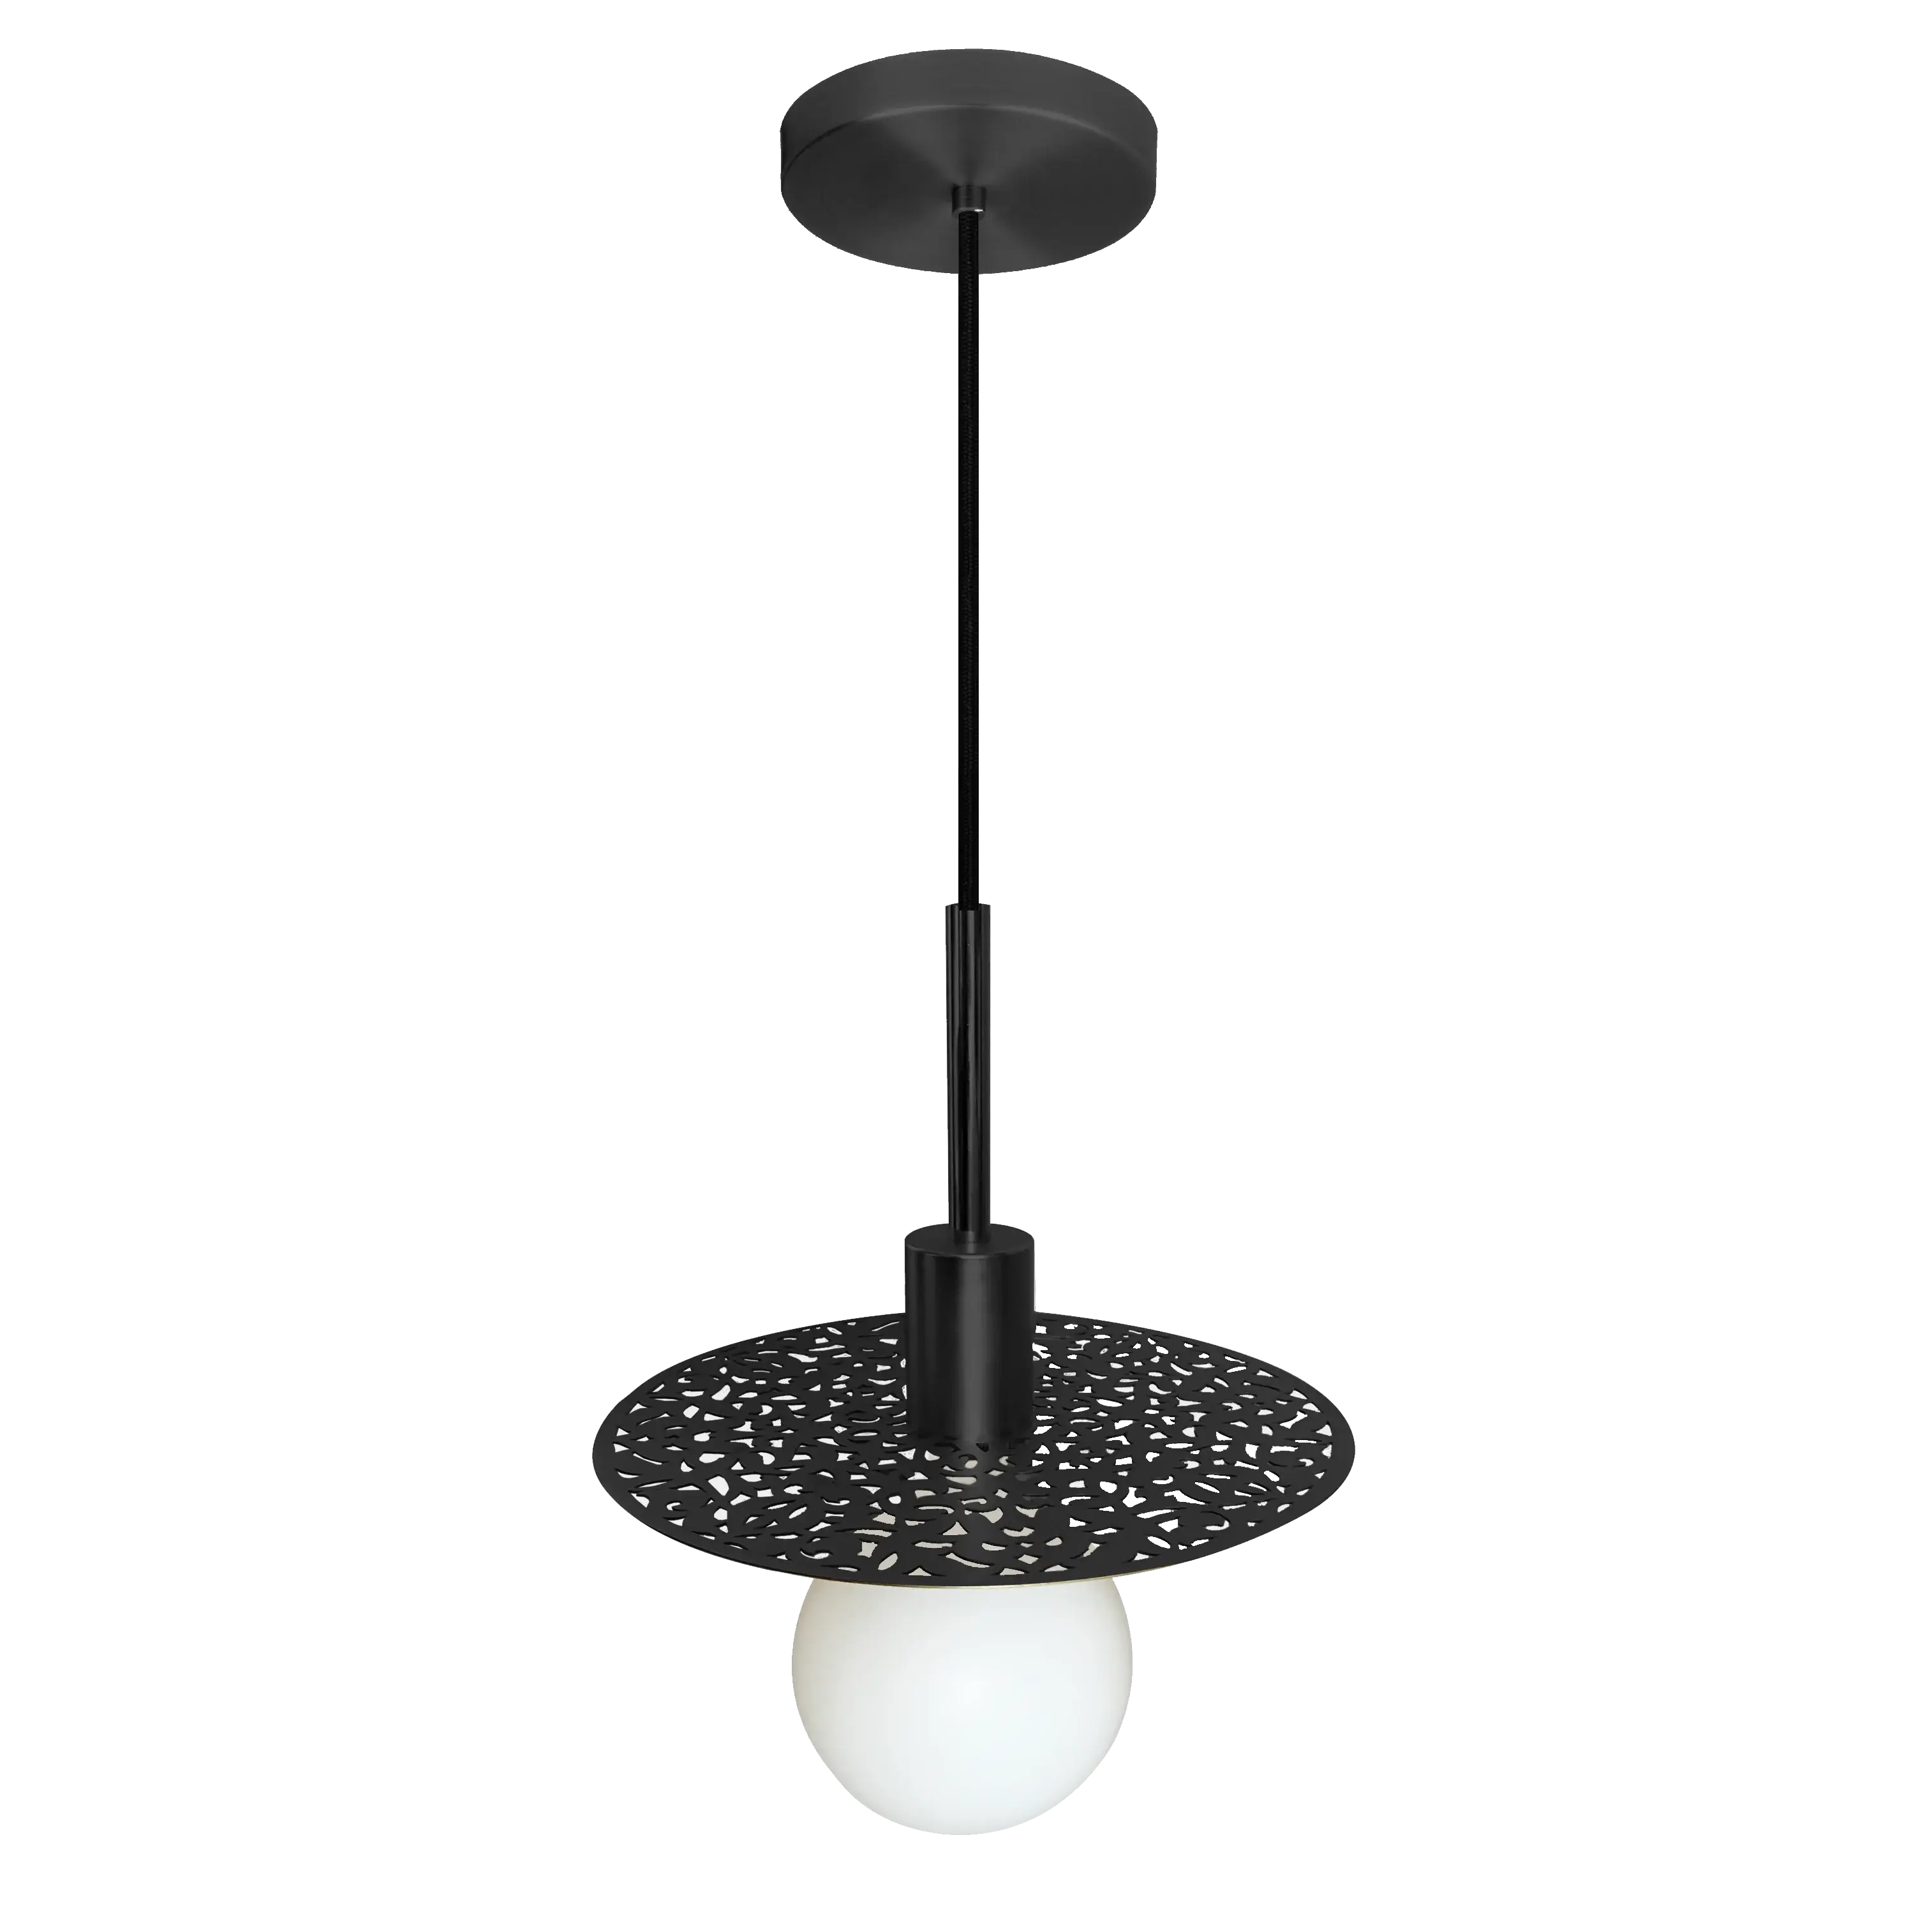 Dounia home Pendant light in black  made of Metal, Model: Riad disc LED Suspension